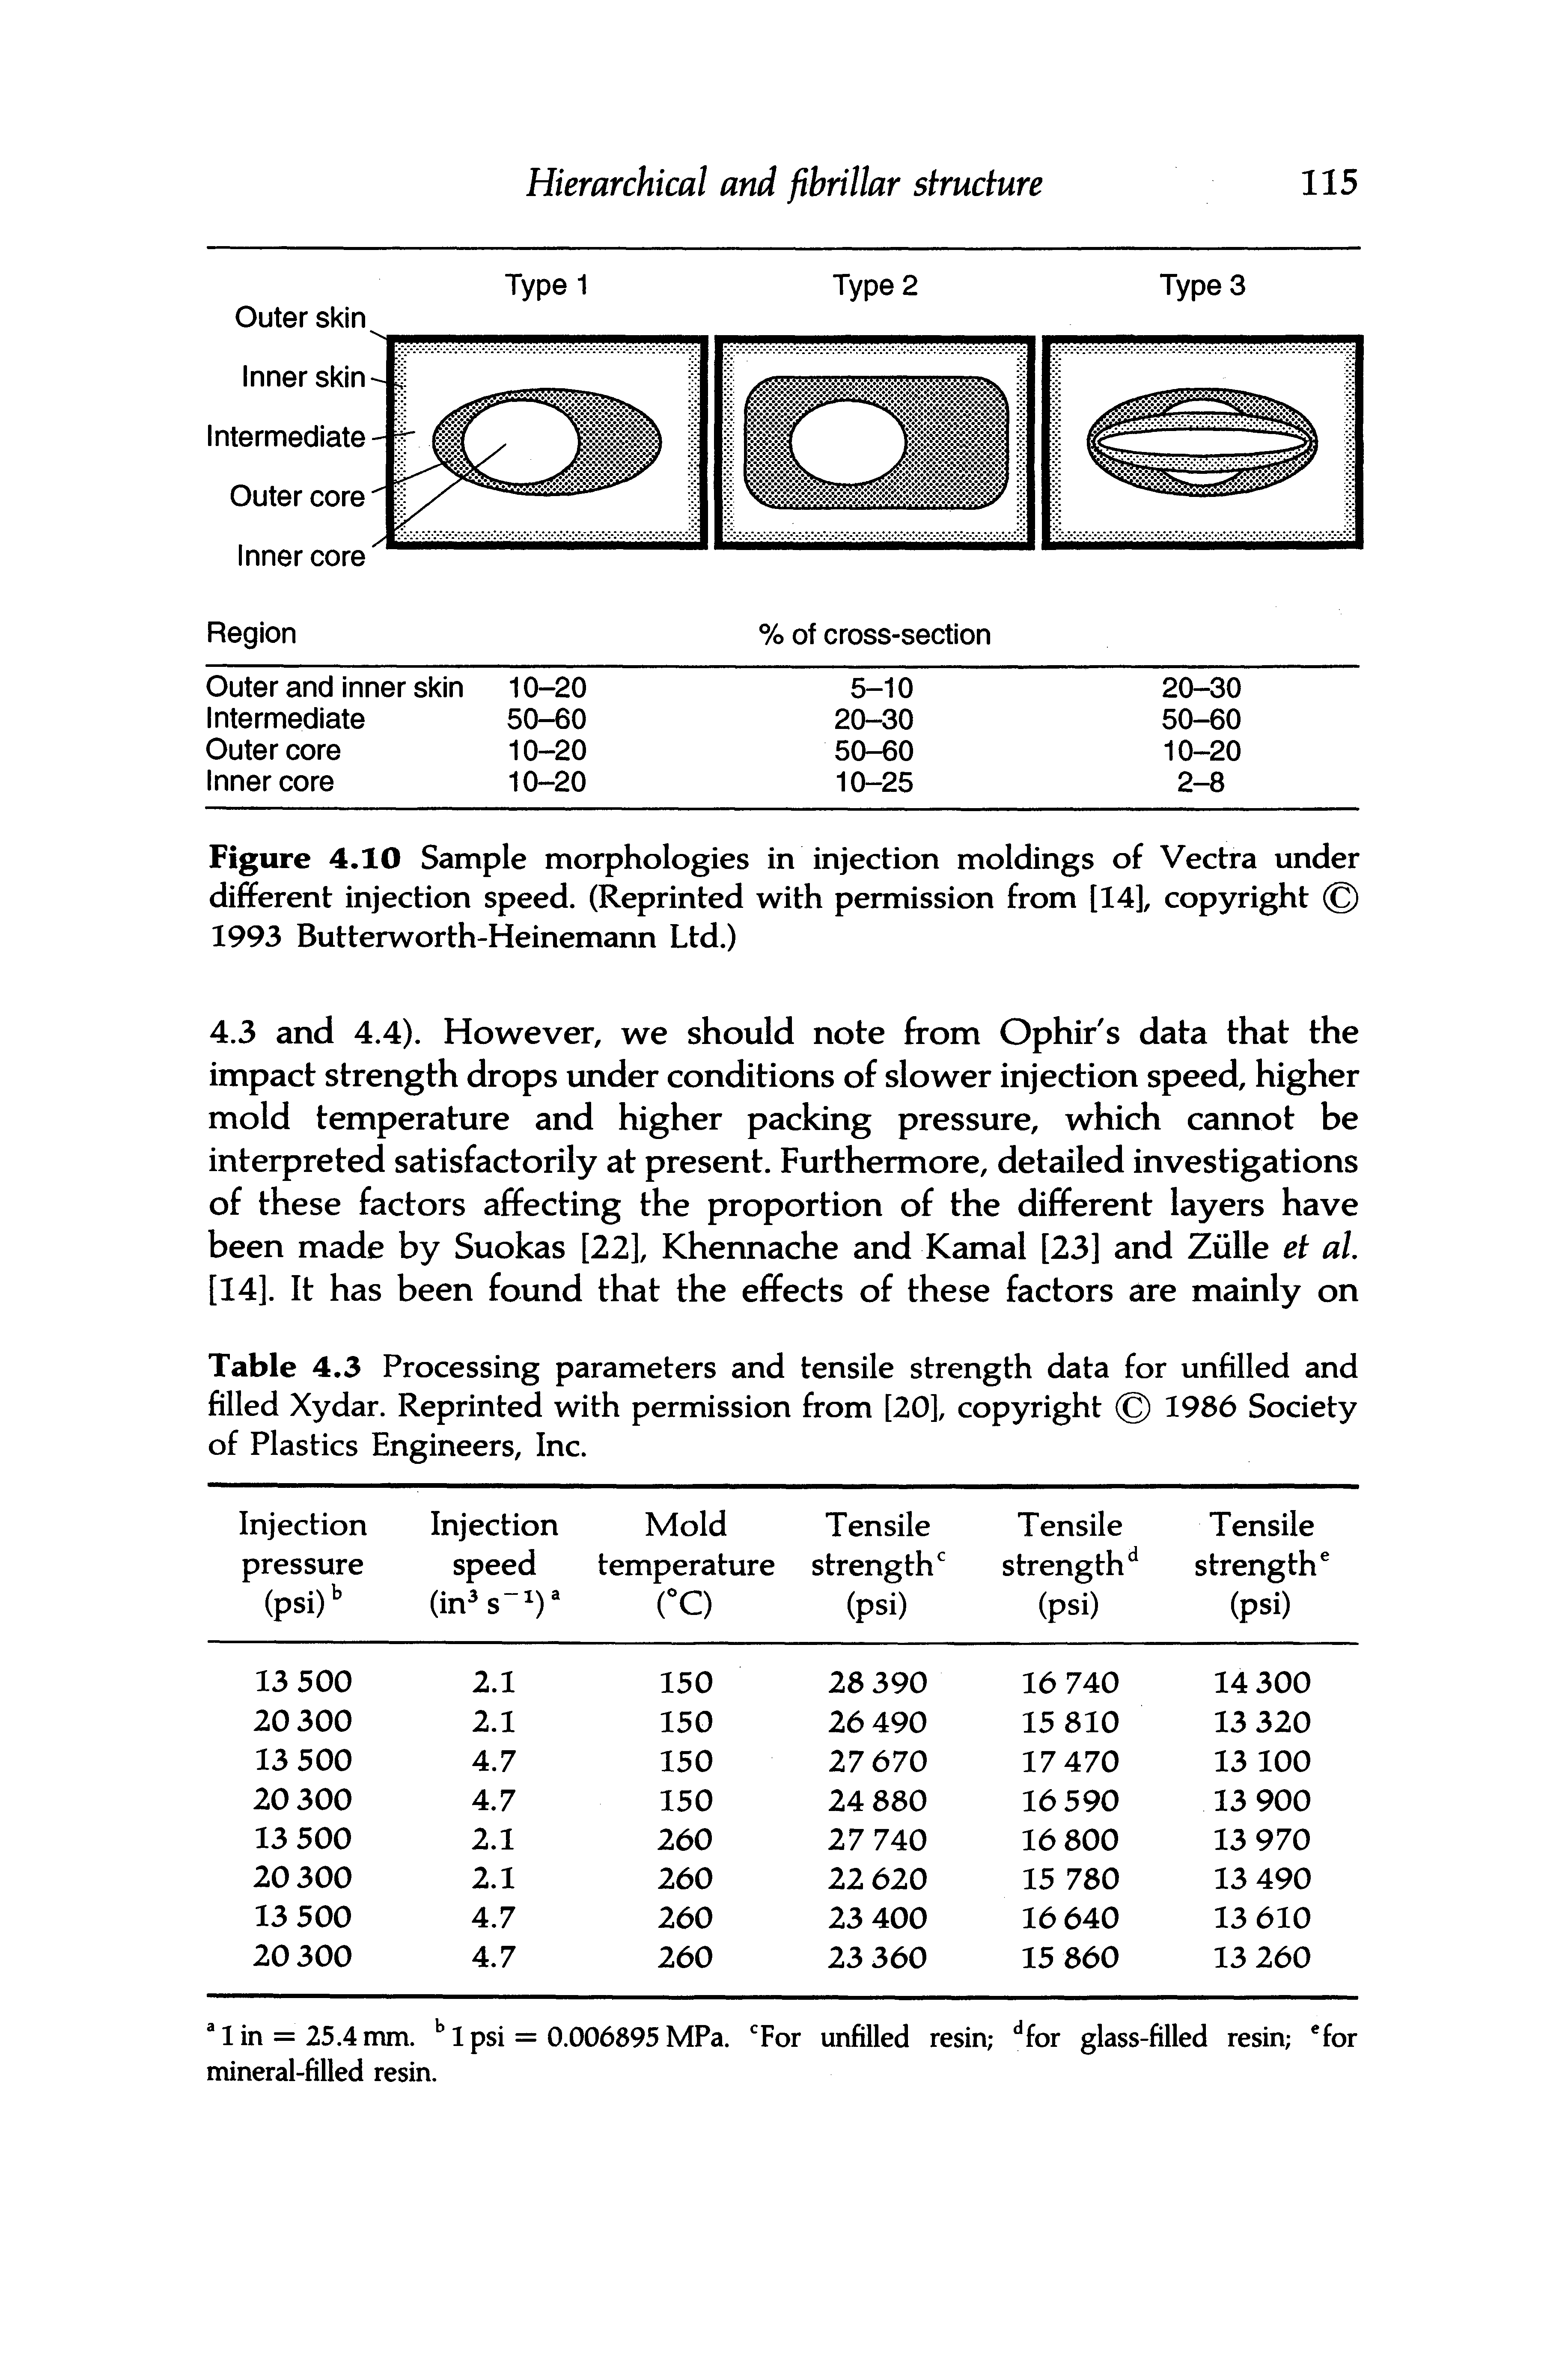 Table 4.3 Processing parameters and tensile strength data for unfilled and filled Xydar. Reprinted with permission from [20], copyright 1986 Society of Plastics Engineers, Inc.